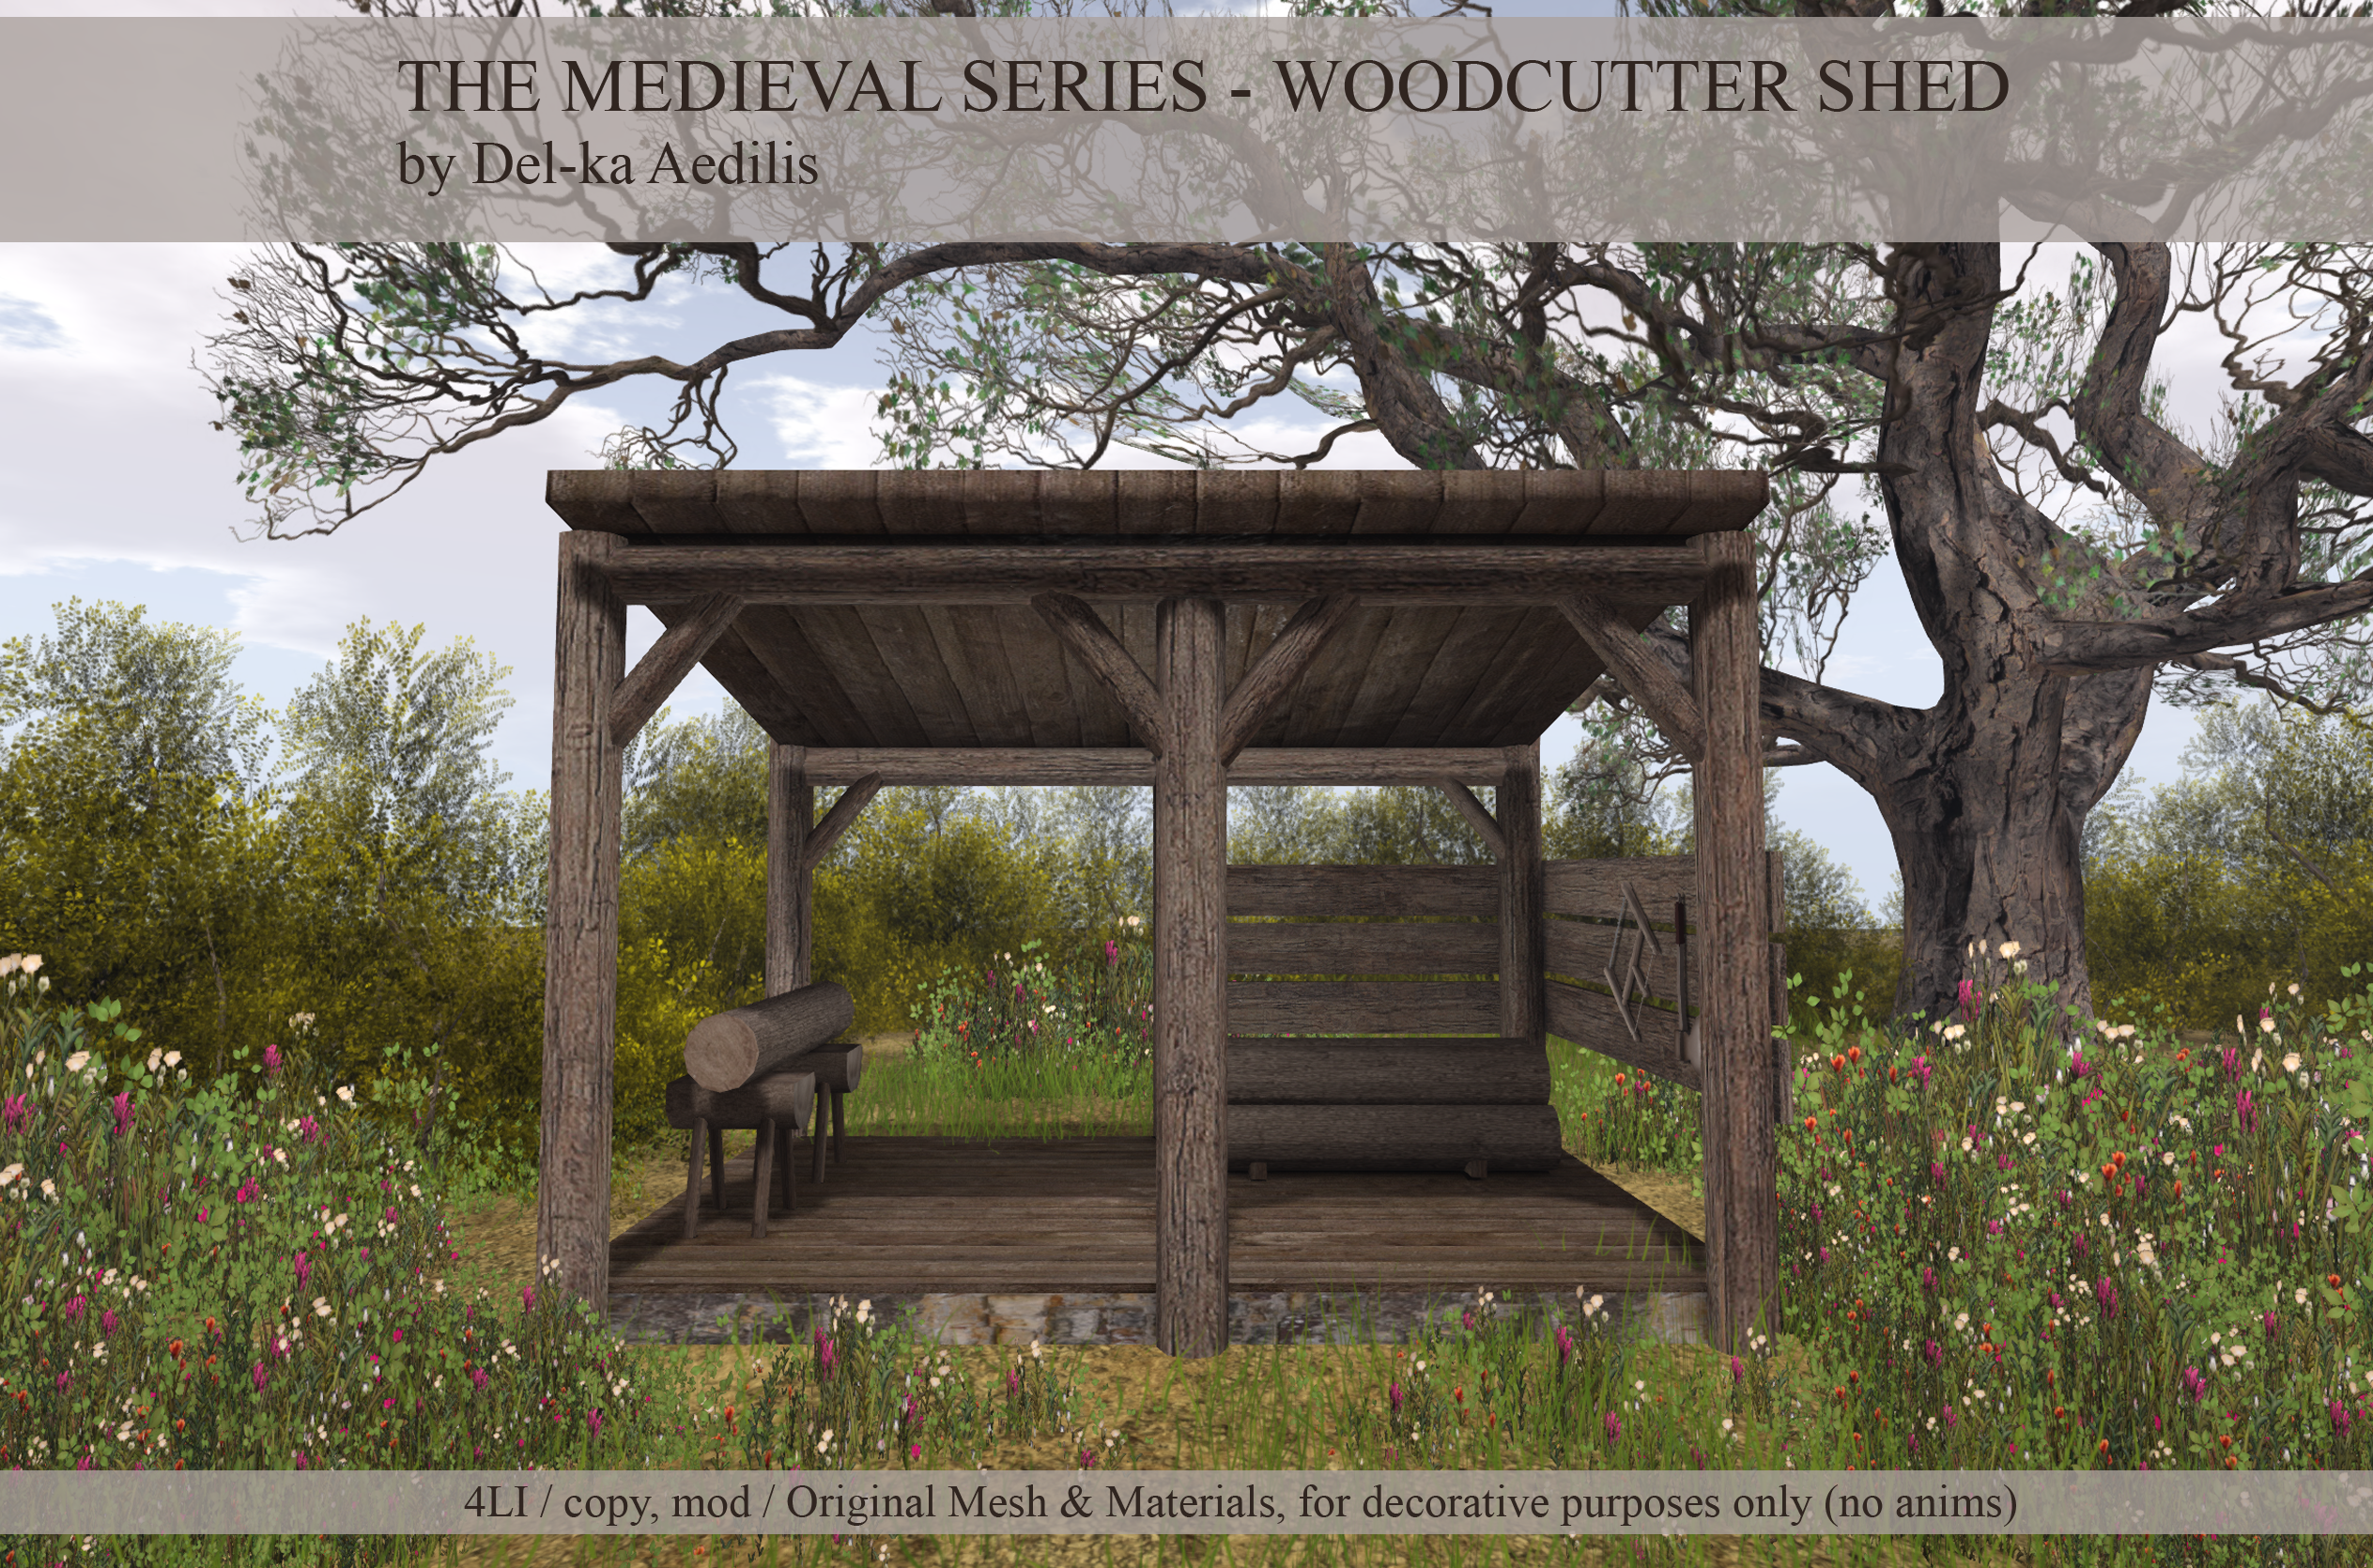 Del-ka Aedilis – The Medieval Series – Woodcutter Shed